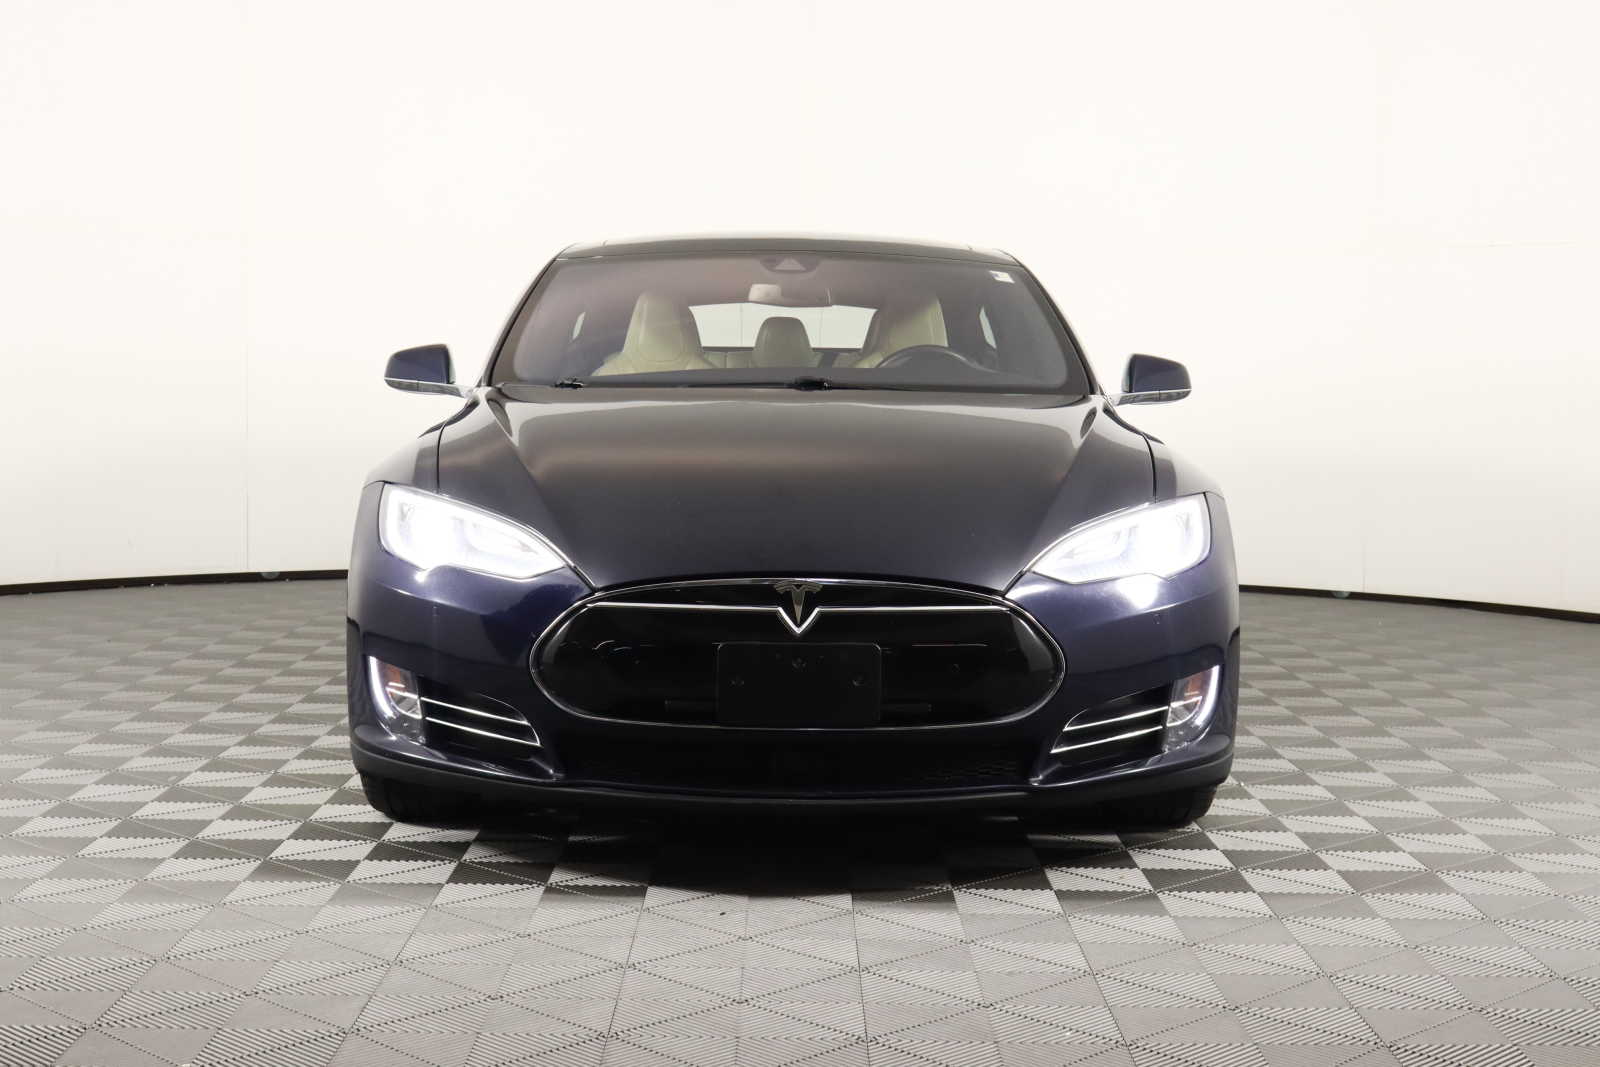 Used 2015 Tesla Model S Performance with VIN 5YJSA1H43FF087440 for sale in Wayland, MA